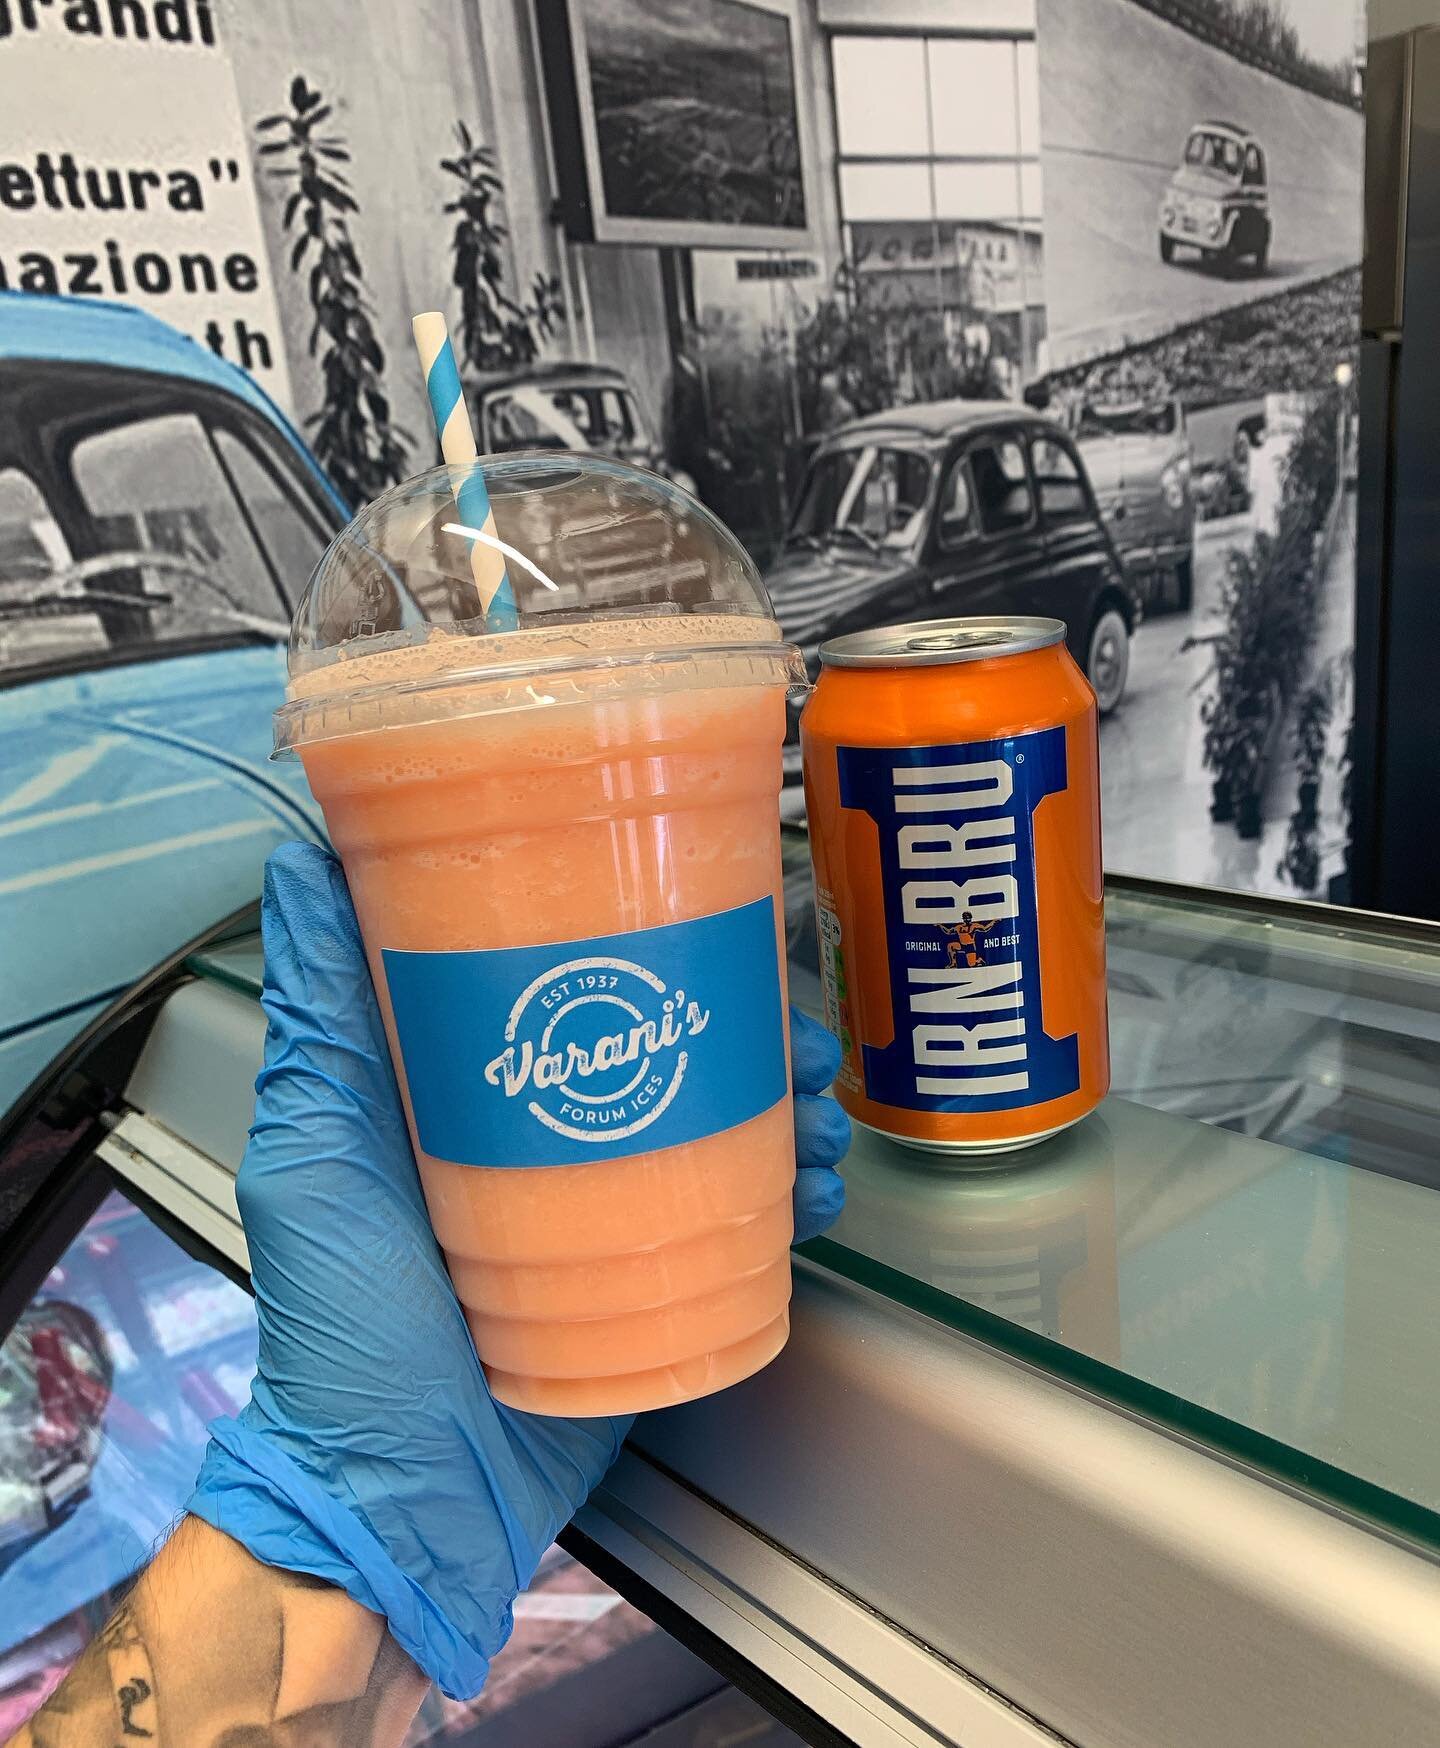 I can imagine a few sore heeds are out there today😂

But who cares we&rsquo;re gawn to the euros💙

We will sort yer rough Fridays with Irn Bru iced drinks💋

#icanboogie